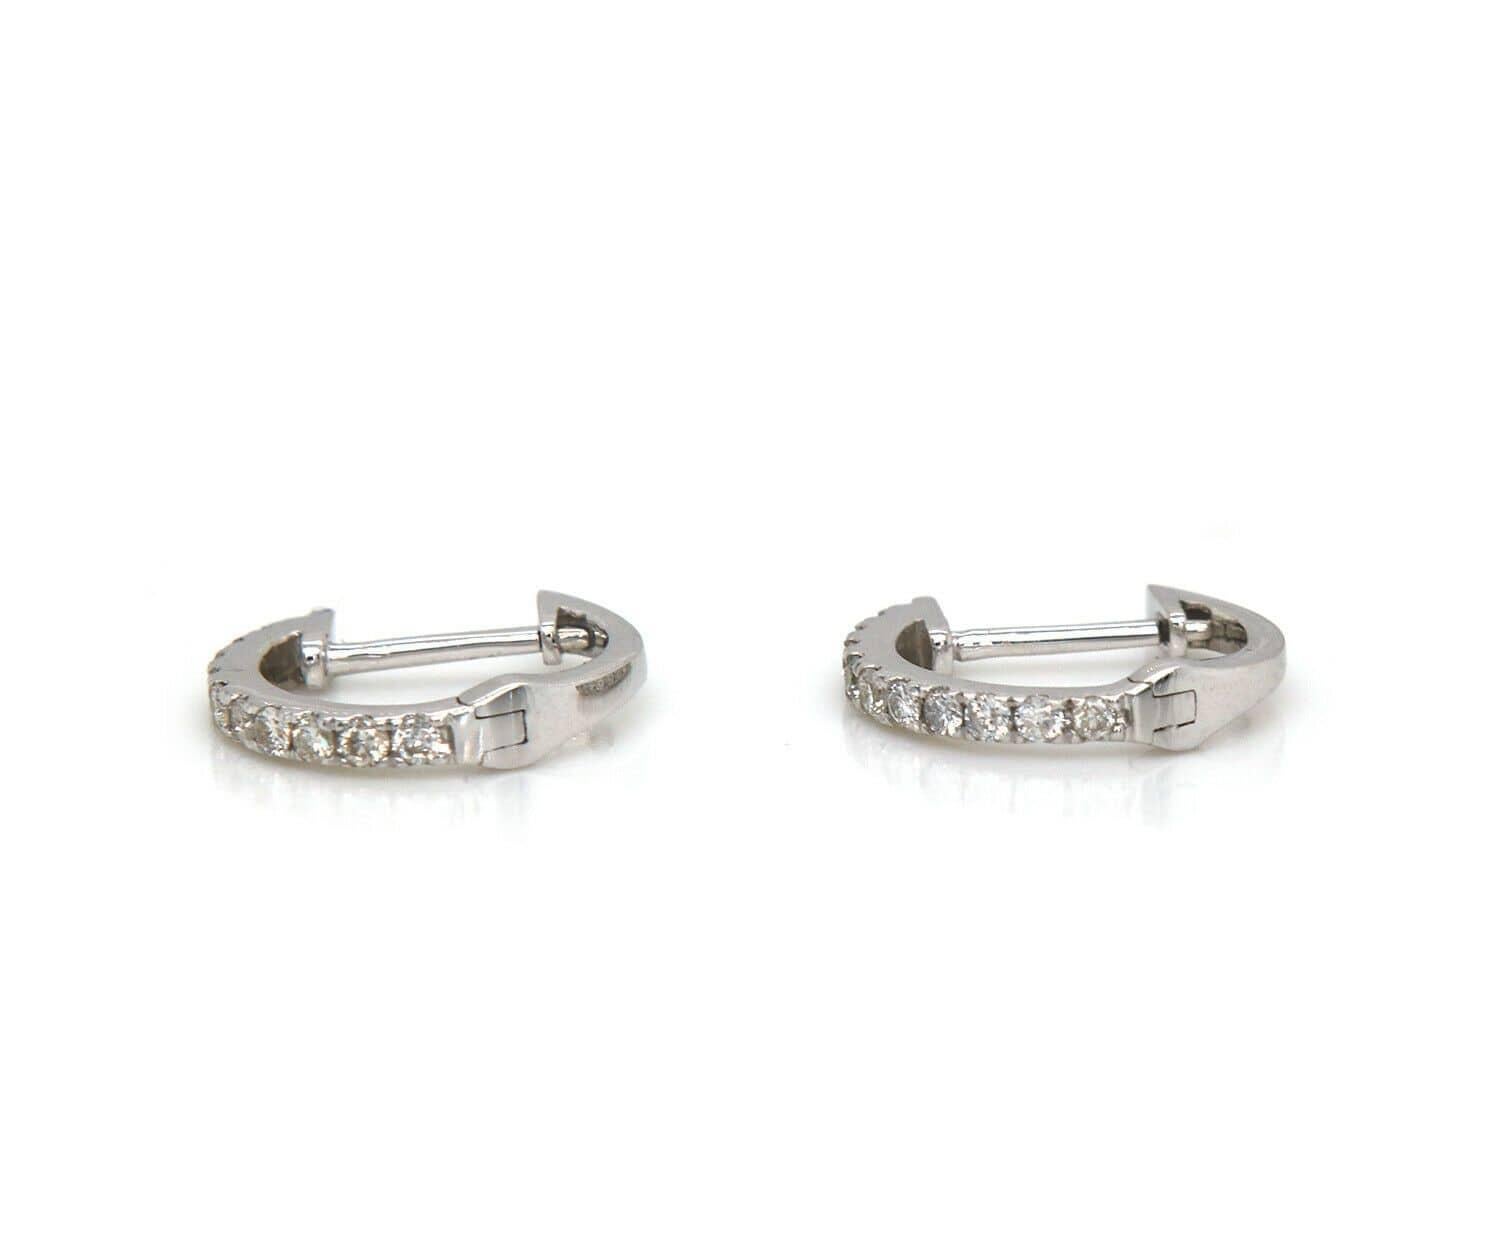 New 0.22ctw Diamond Petite Huggie Earrings in 14K White Gold In New Condition For Sale In Vienna, VA